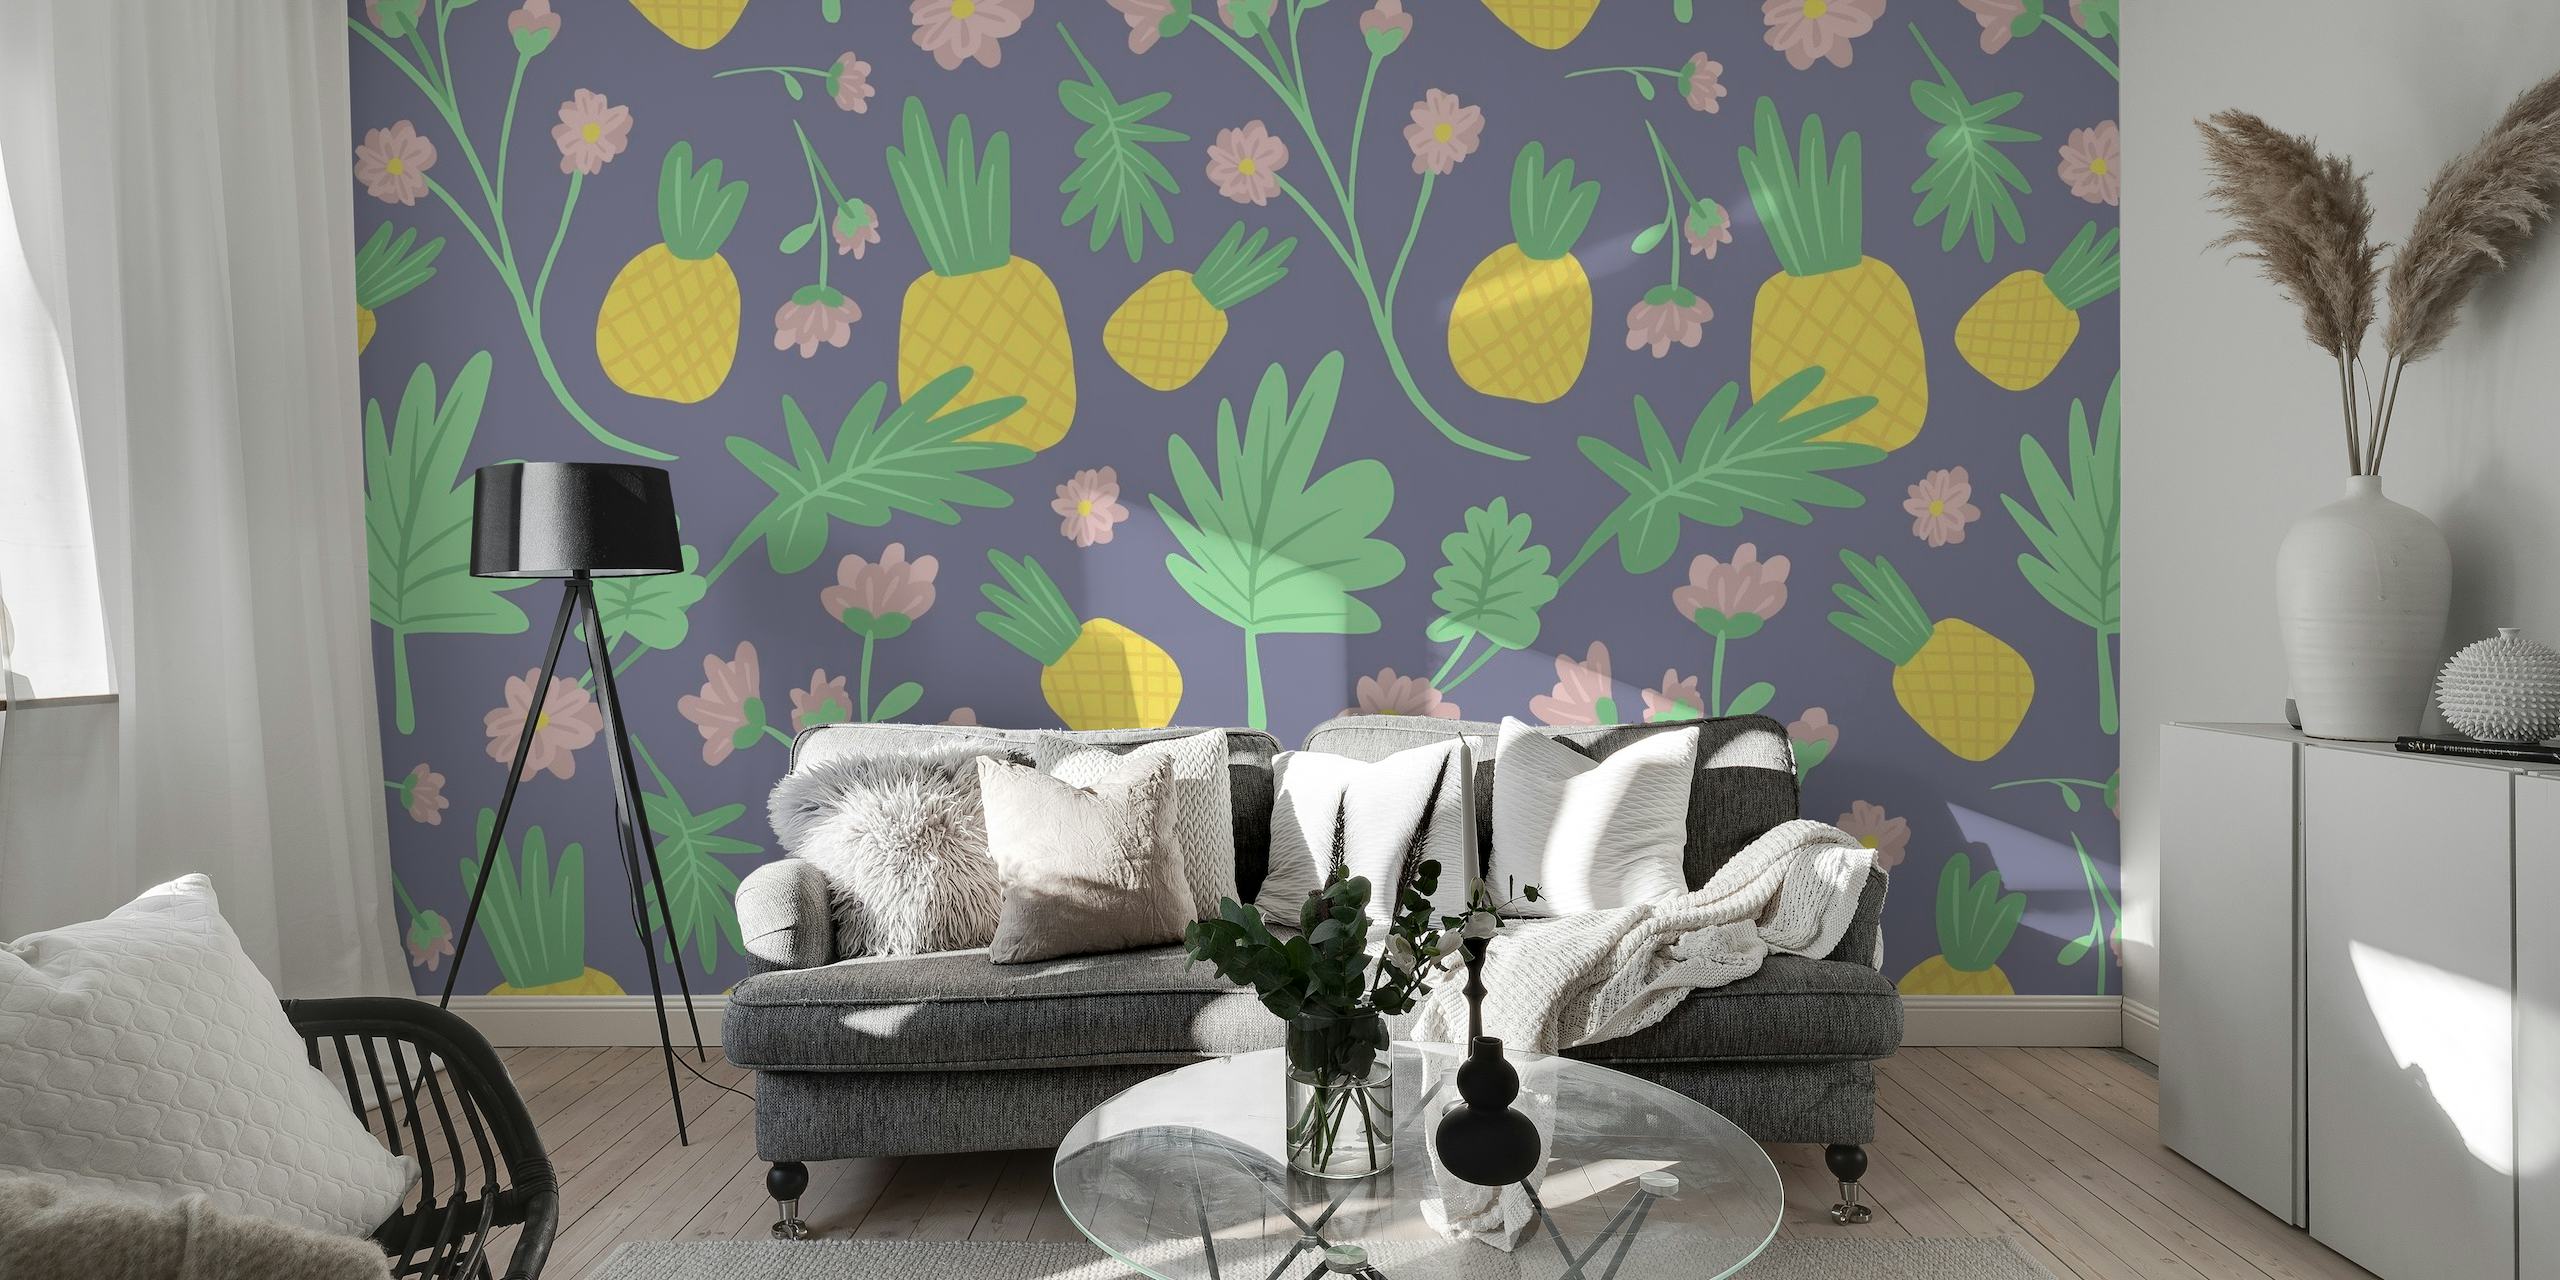 Tropical Pineapple wall mural with pineapple motifs and floral patterns on a purple background